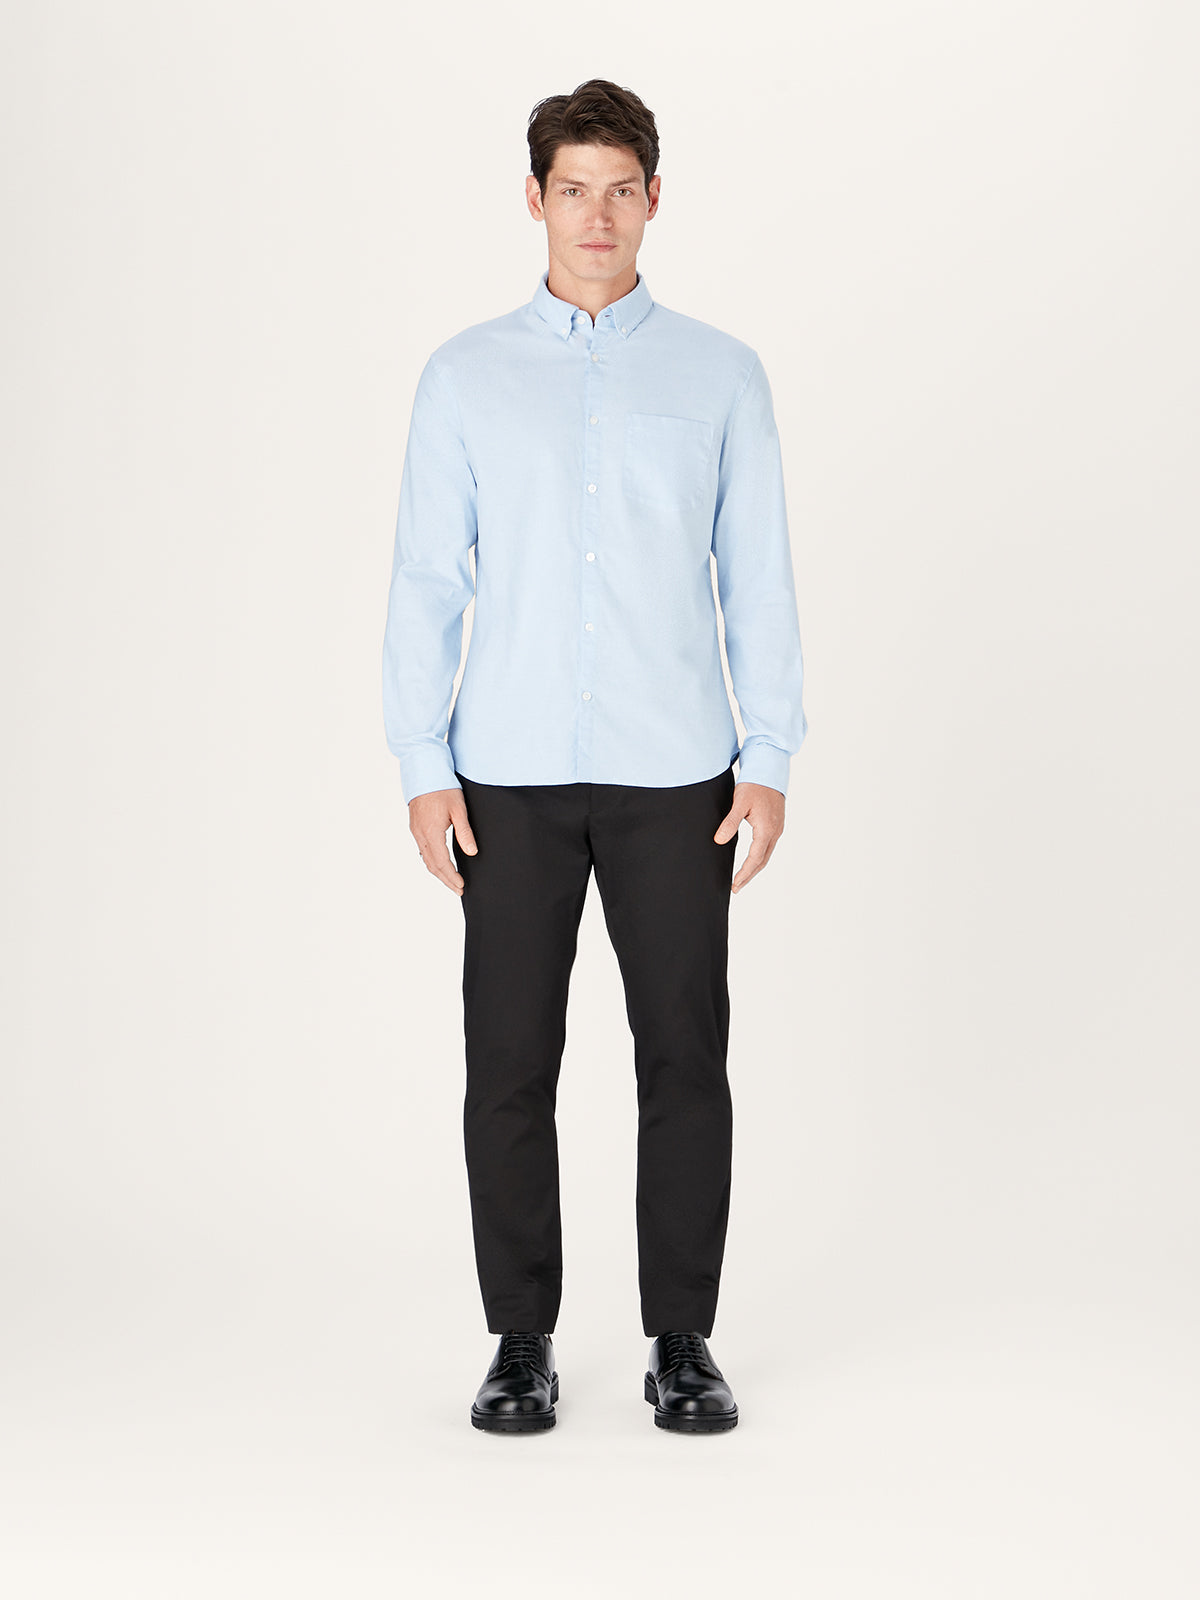 COS - An updated COS icon. Our classic oversized shirt is crafted from  organic cotton with an oversized fit for a relaxed take on tailoring.​ Shop  shirts